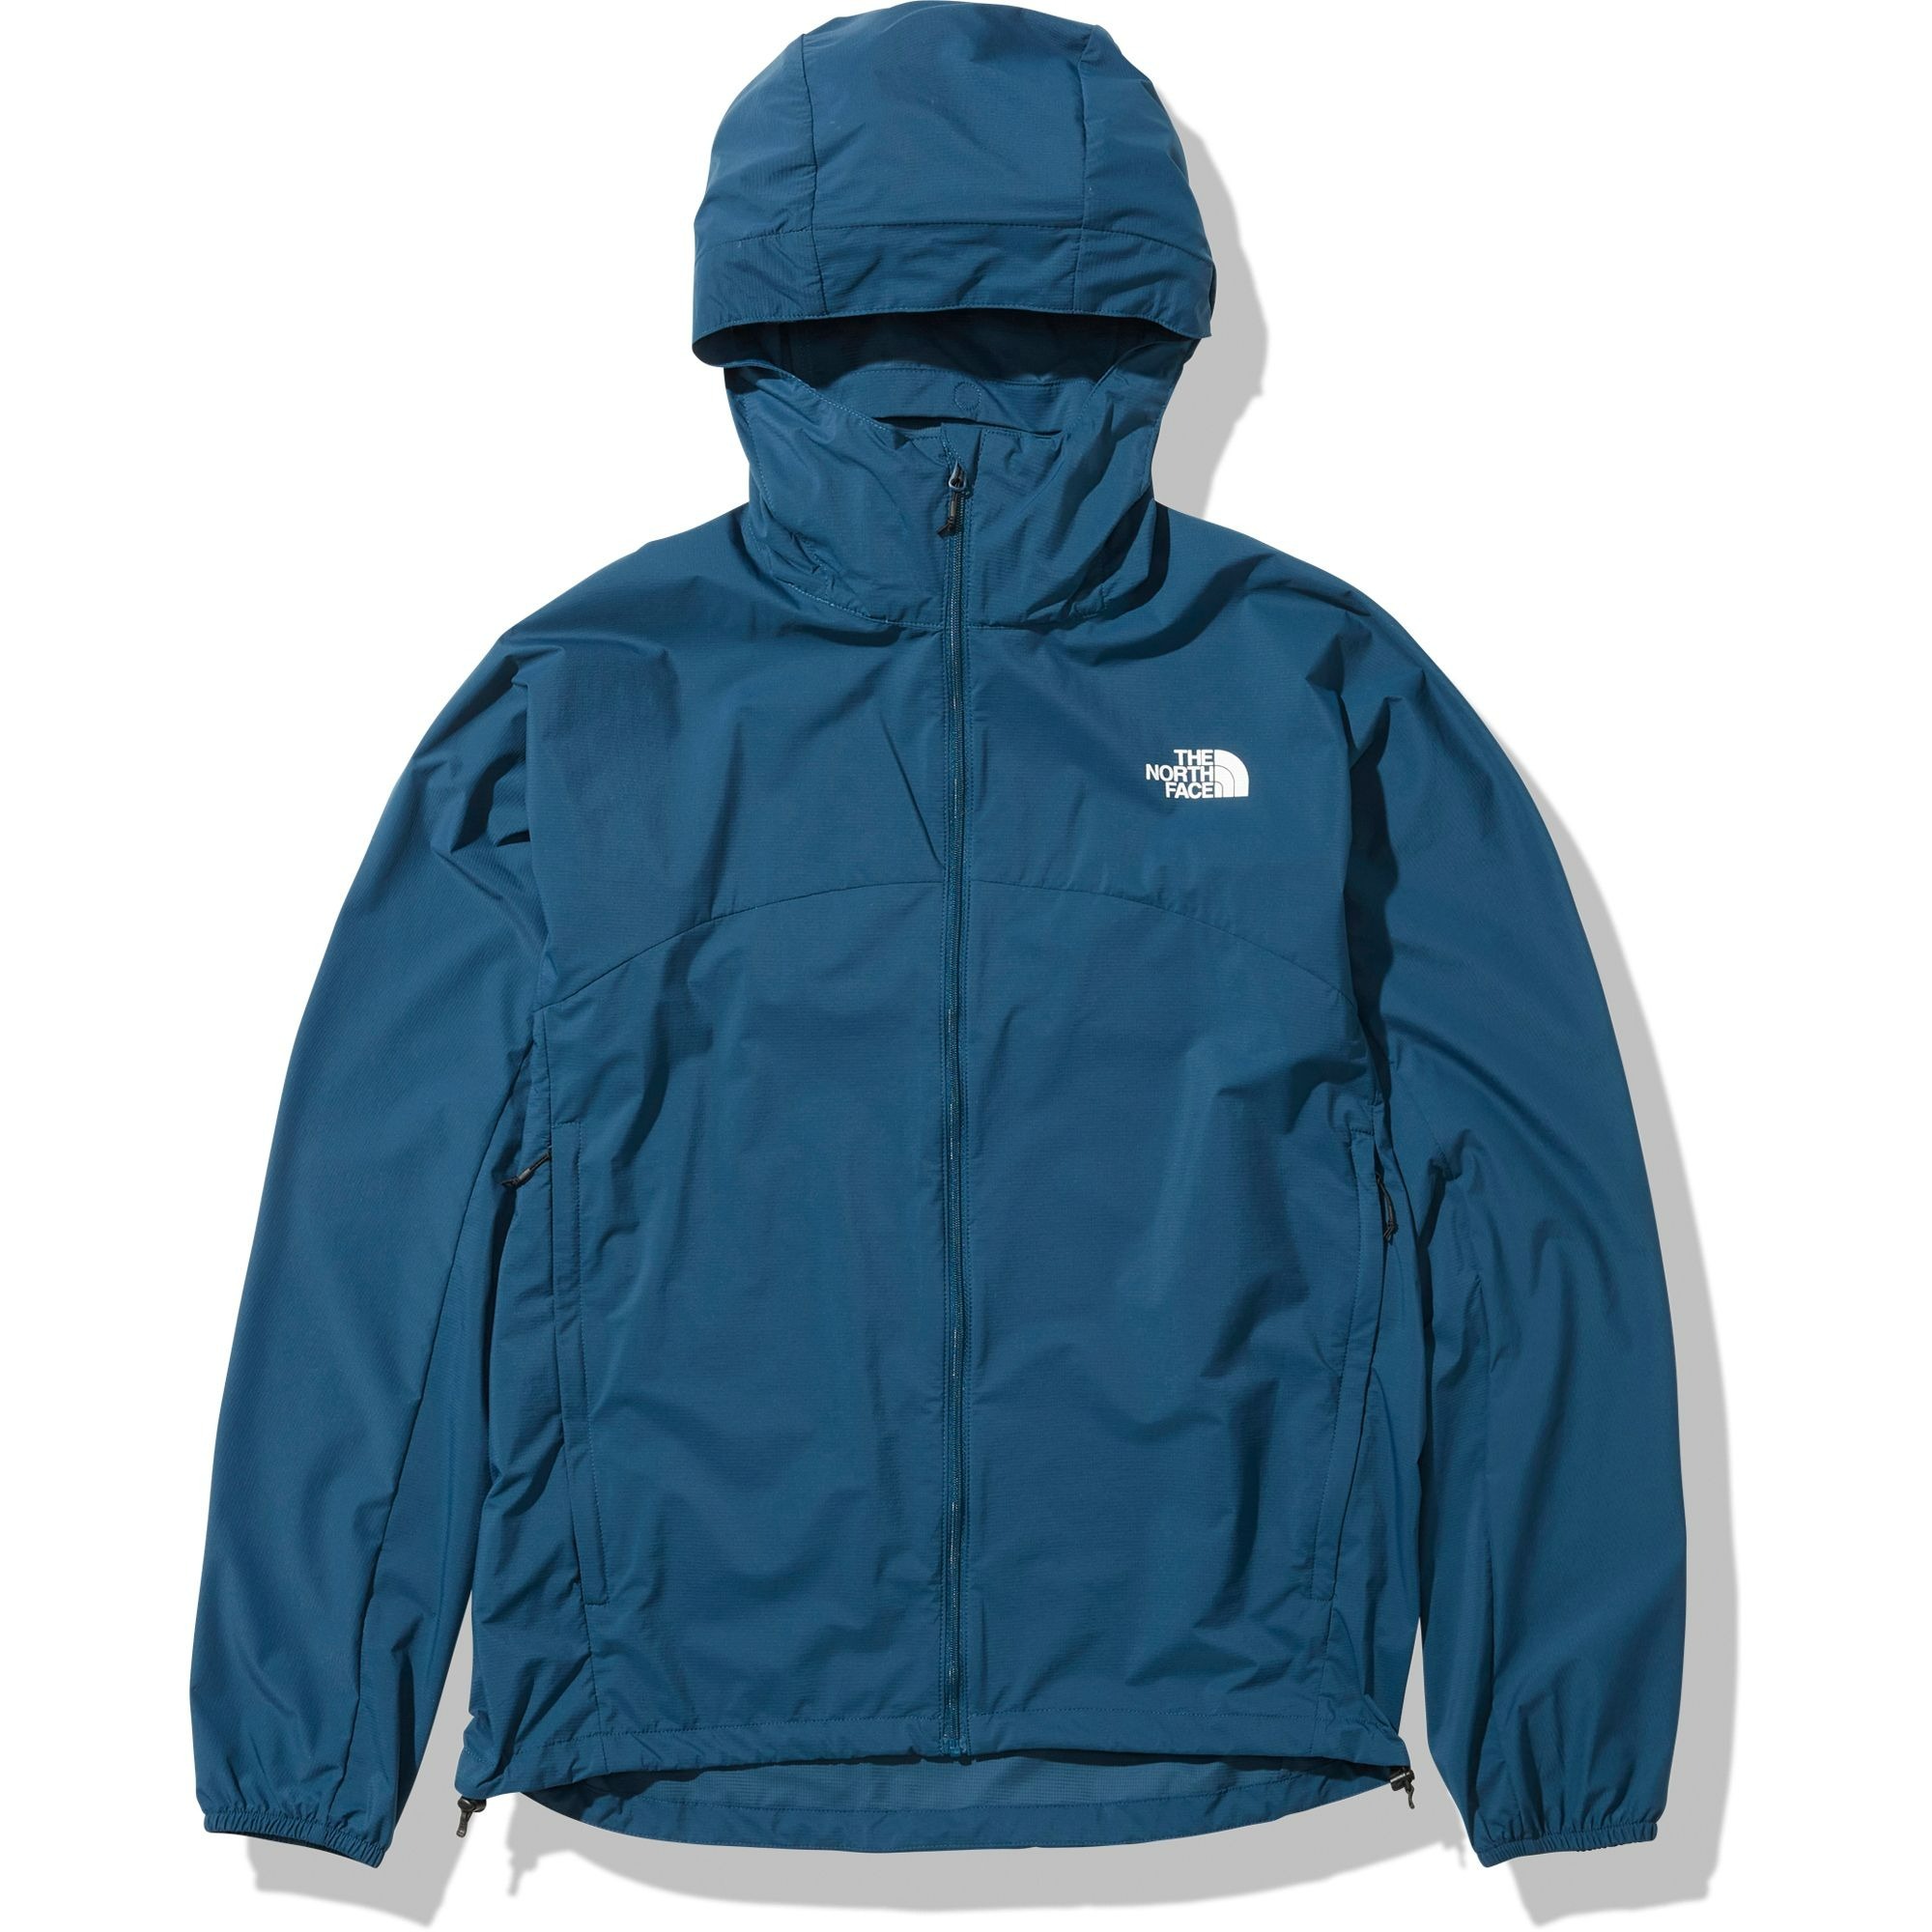 NP22202 日本THE NORTH FACE SWALLOWTAIL HOODIE 連帽外套